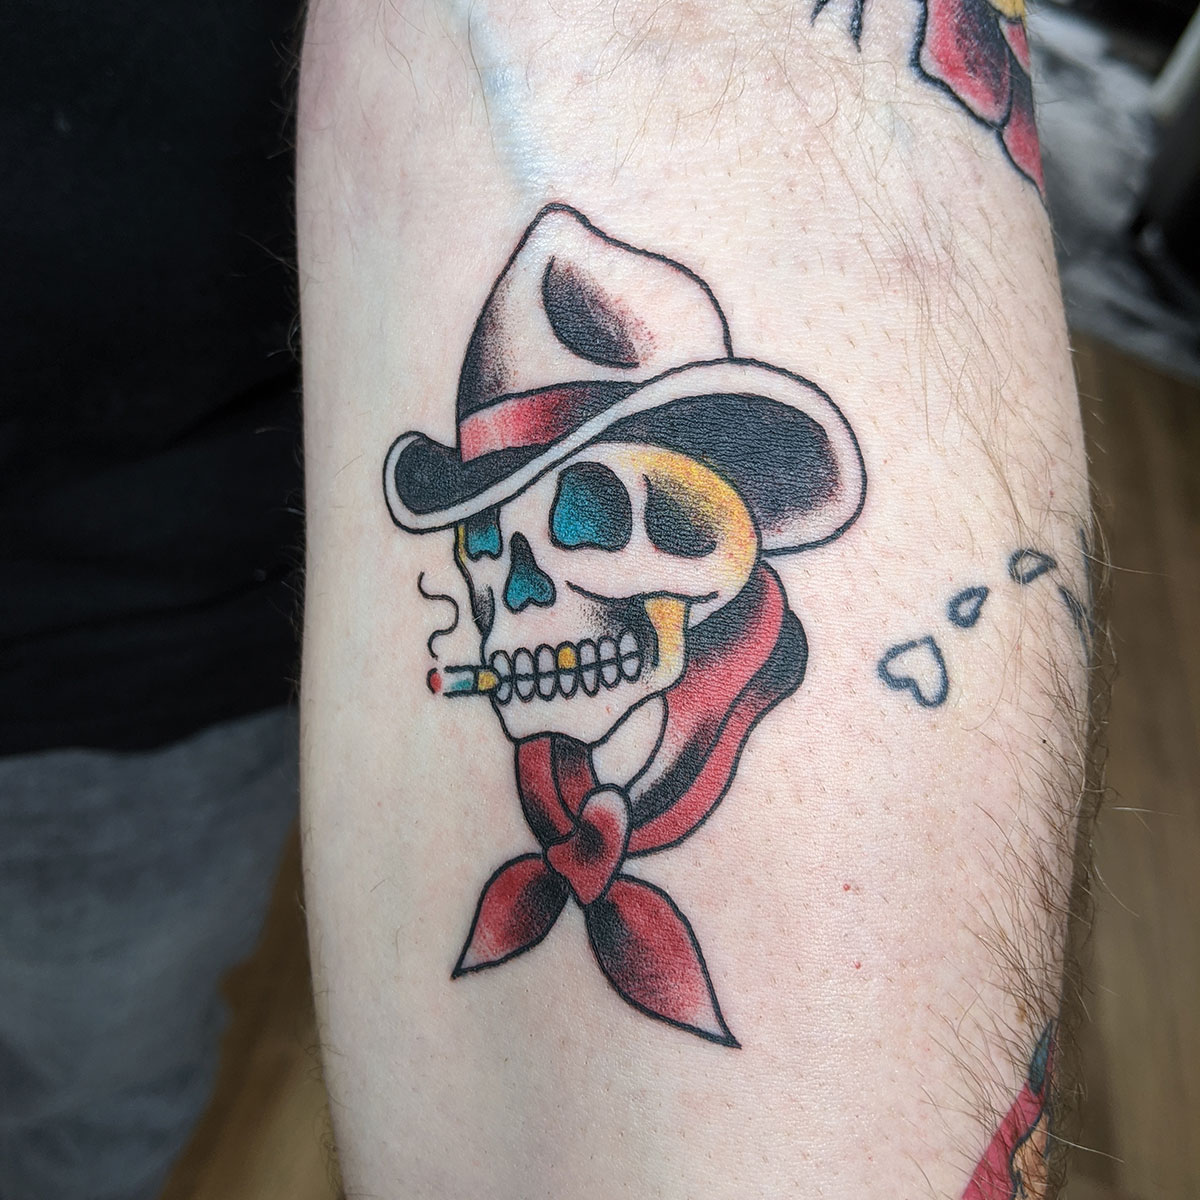 American Classic Tattoo And Body Piercing Brian awkwardtattooer Laying  Down Some Cowboy Skull Brian Works Thursfri 510 And Sat Come In To See  Him Or Hit Up The DMs  xn90absbknhbvgexnp1ai443